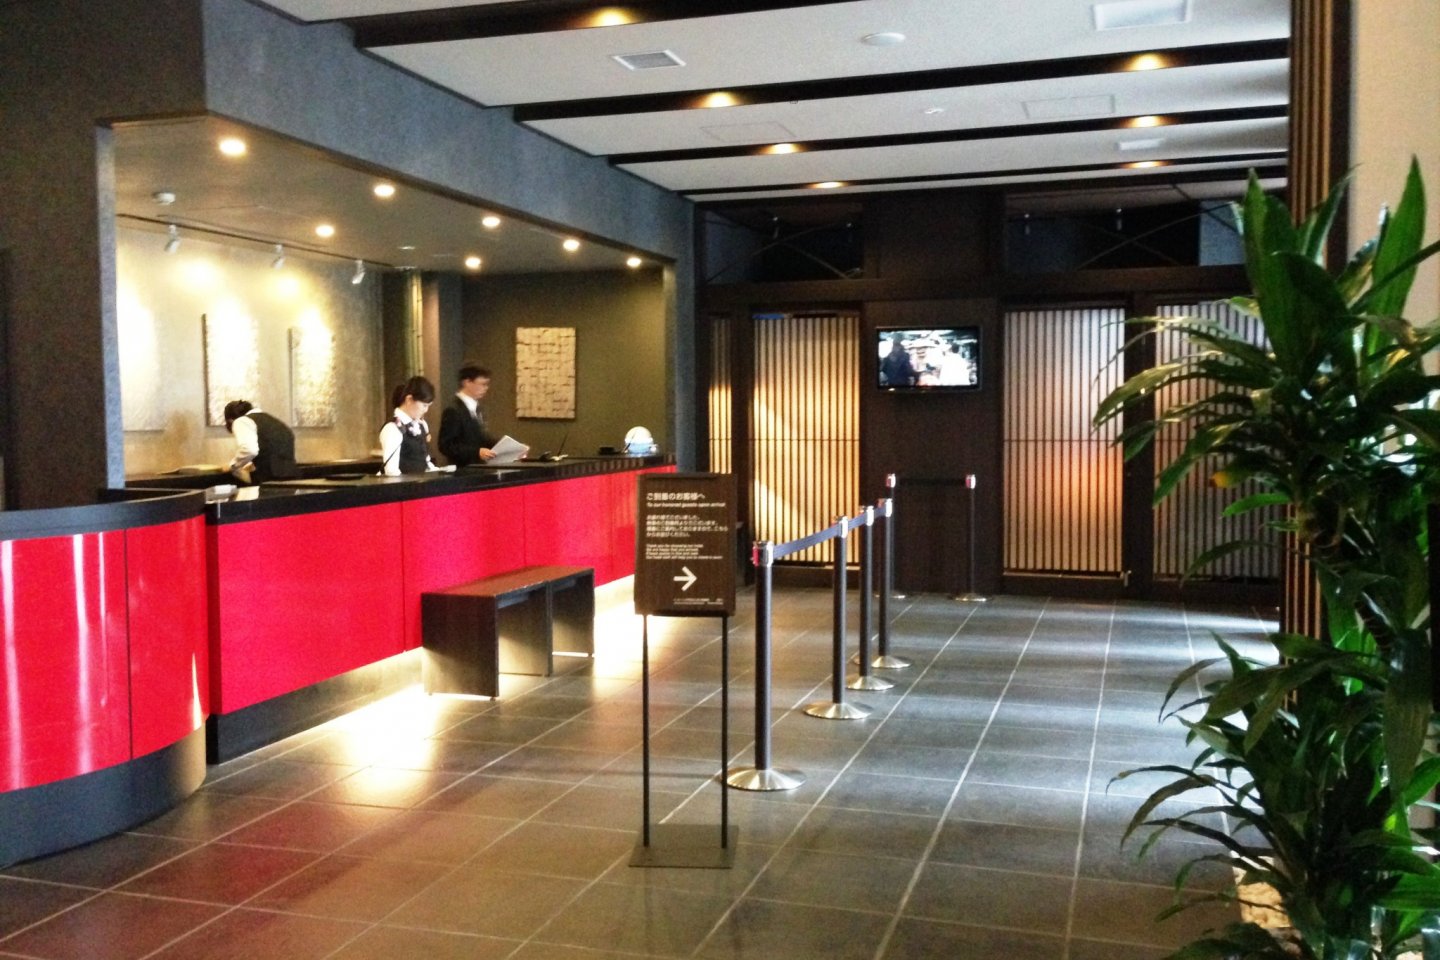 The staff at Dormy Inn are waiting to welcome you to Kyoto.